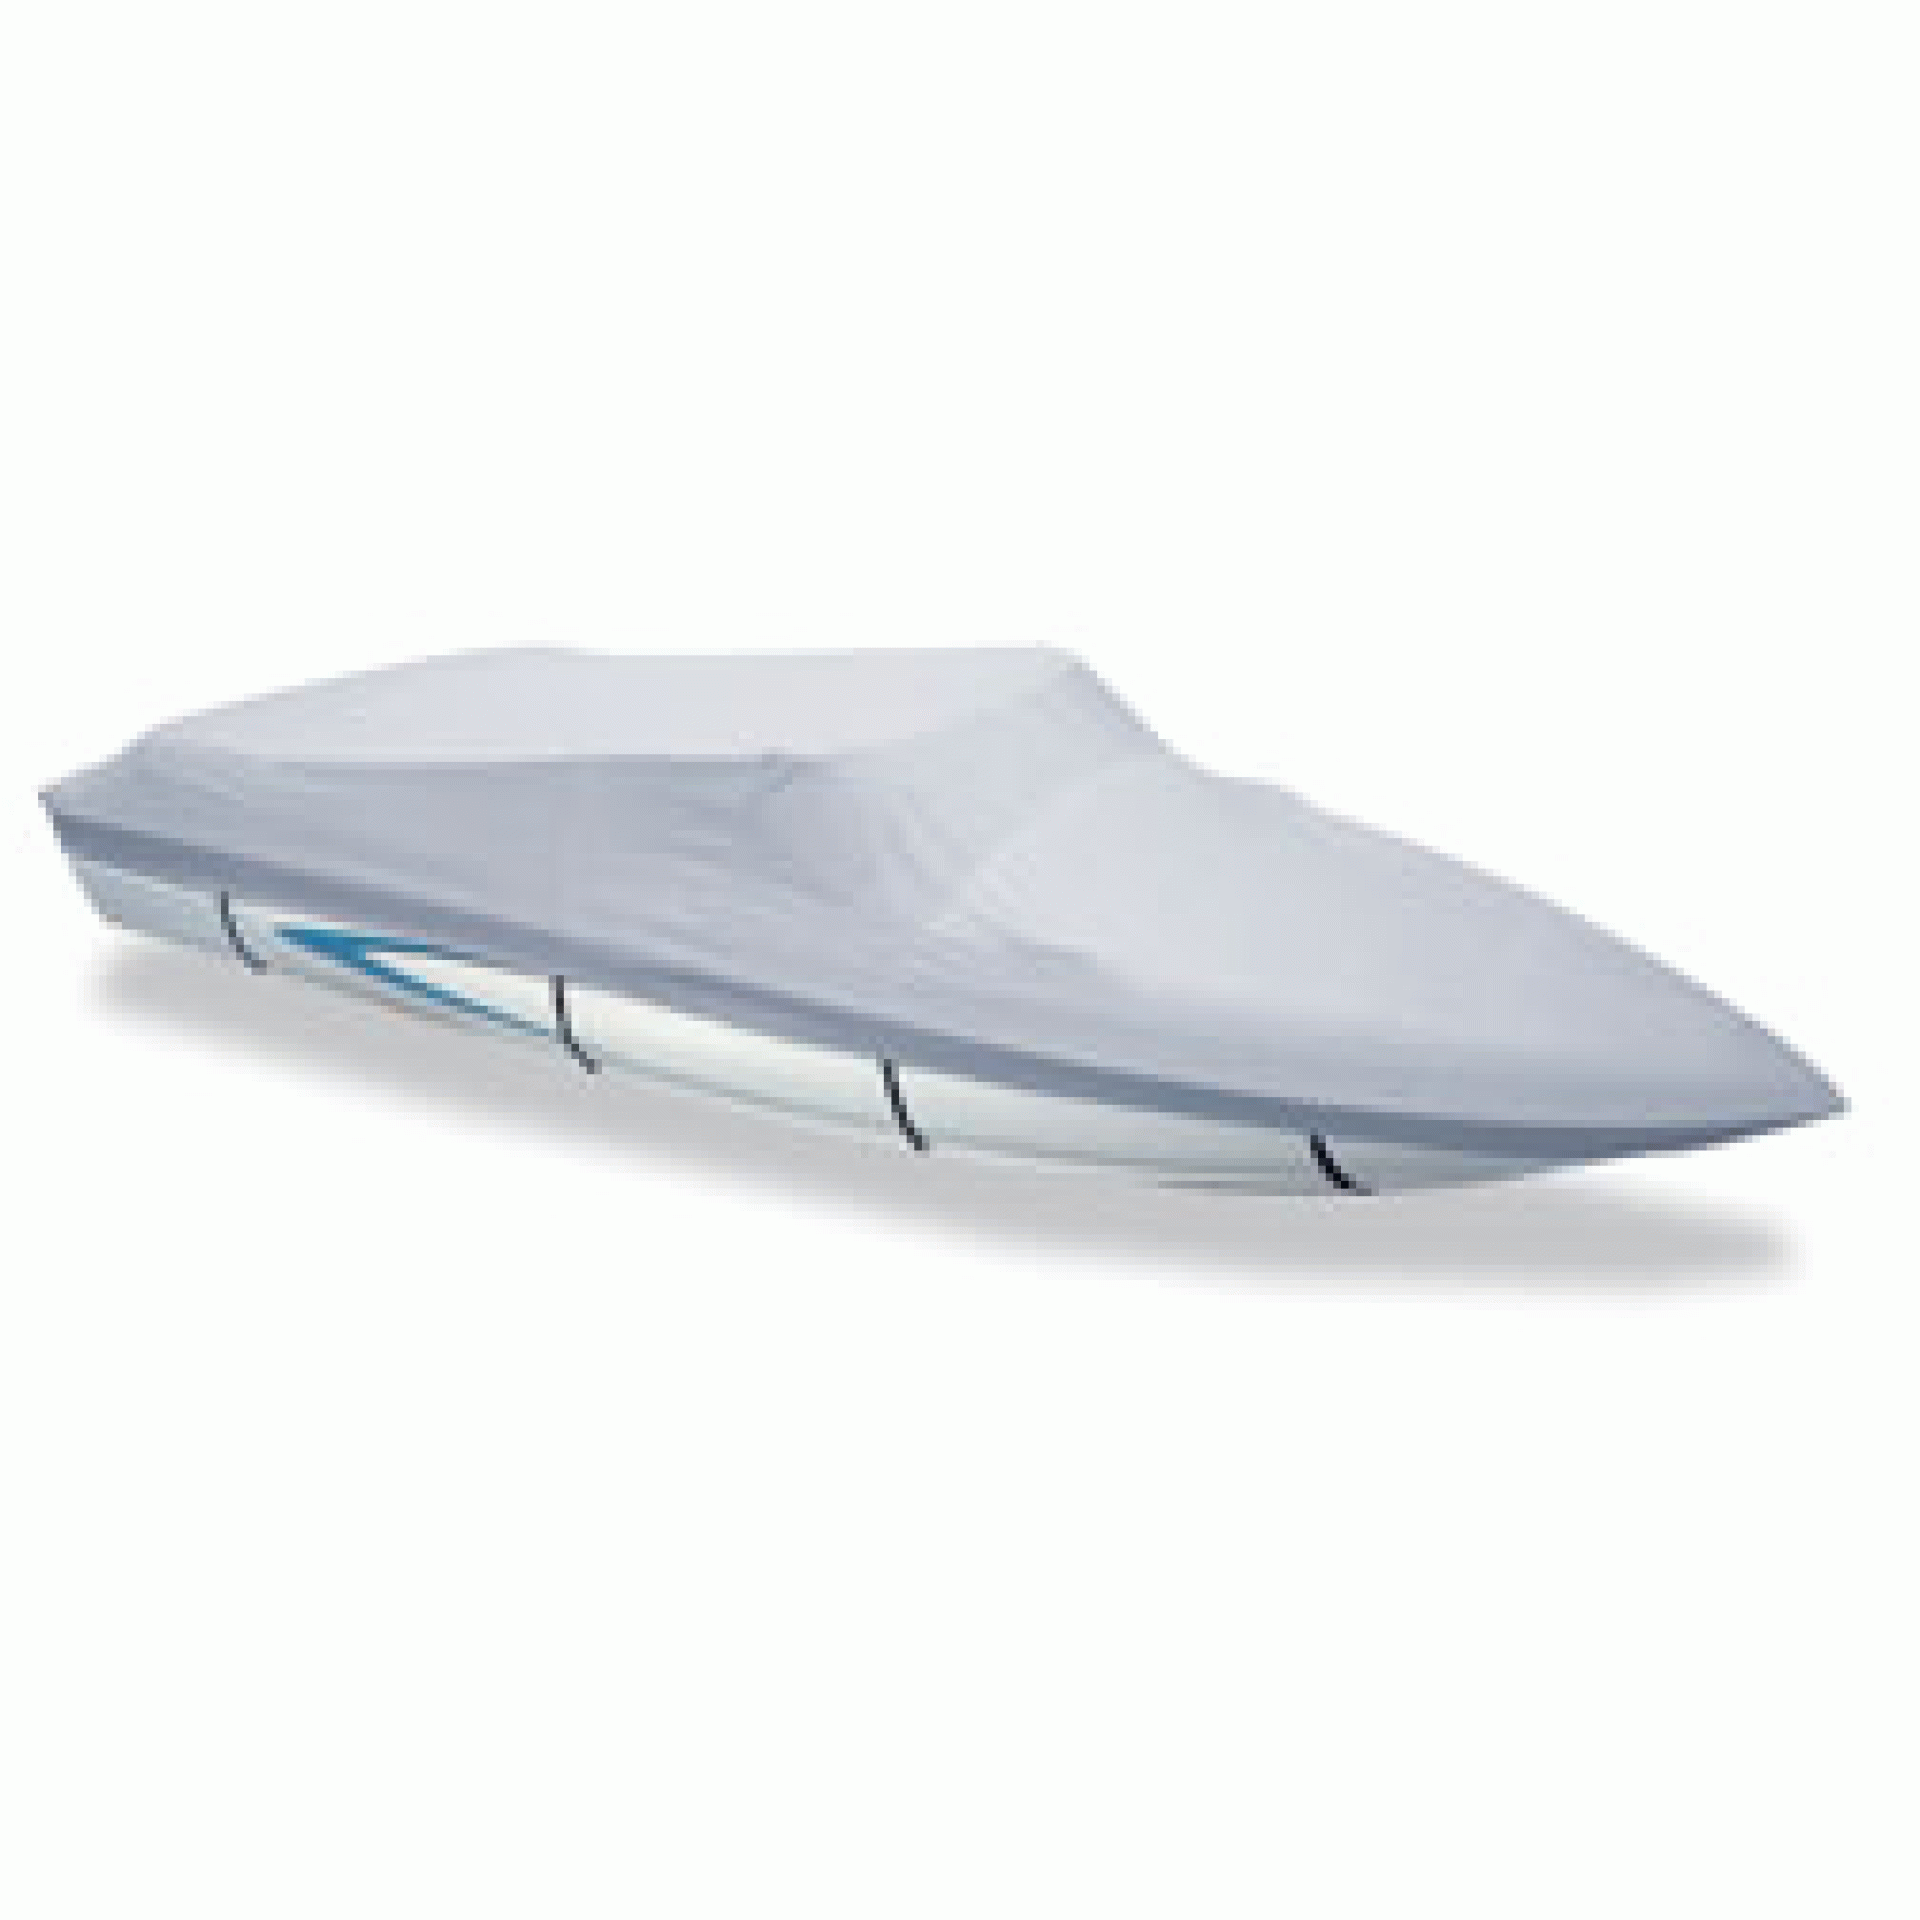 CARVER INDUSTRIES | 77120P-10 | BOAT COVER V HULL RUNABOUT I/O 20' 6" 102" BEAM POLY GUARD GRAY